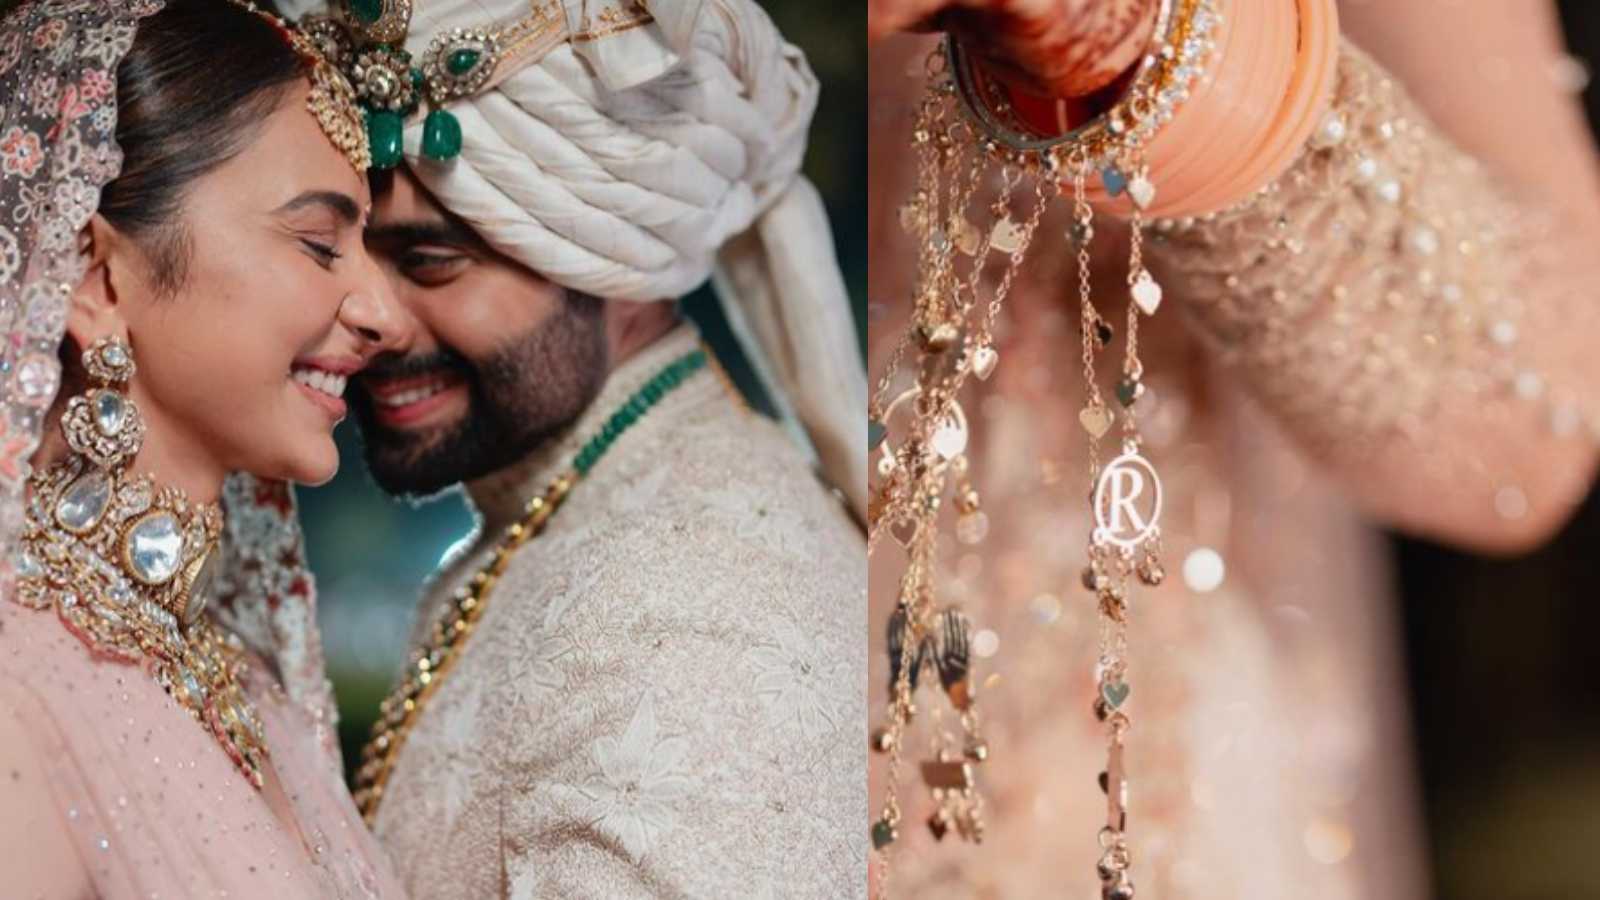 Rakul Preet Singh is lost in hubby Jackky Bhagnani's arms, gets her initials etched for the Kaleere in new wedding pics